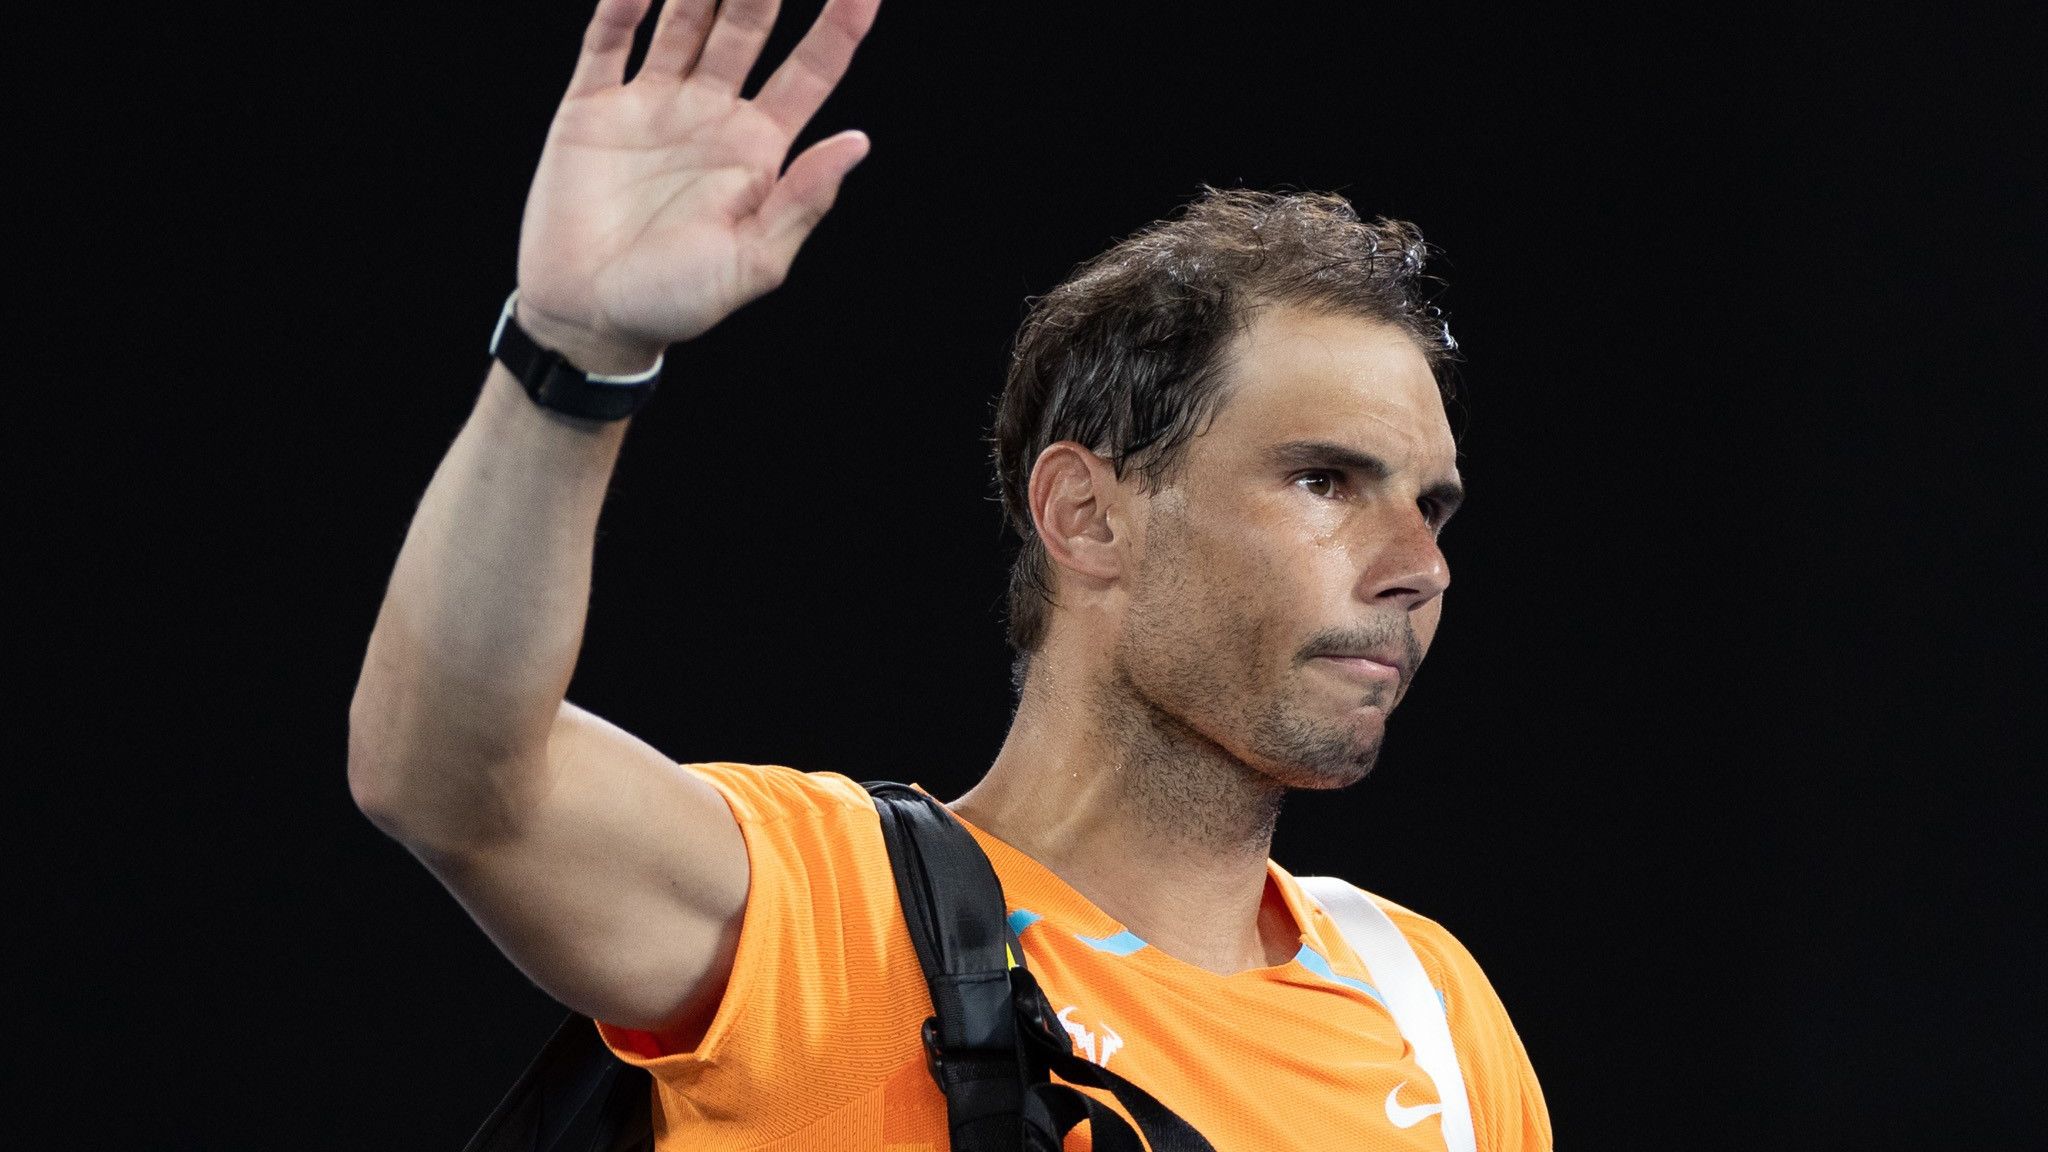 Rafael Nadal of Spain waves to spectators after the men&#x27;s singles 2nd round match against Mackenzie McDonald of the United States at Australian Open tennis tournament in Melbourne, Australia, on Jan. 18, 2023. (Photo by Hu Jingchen/Xinhua via Getty Images)